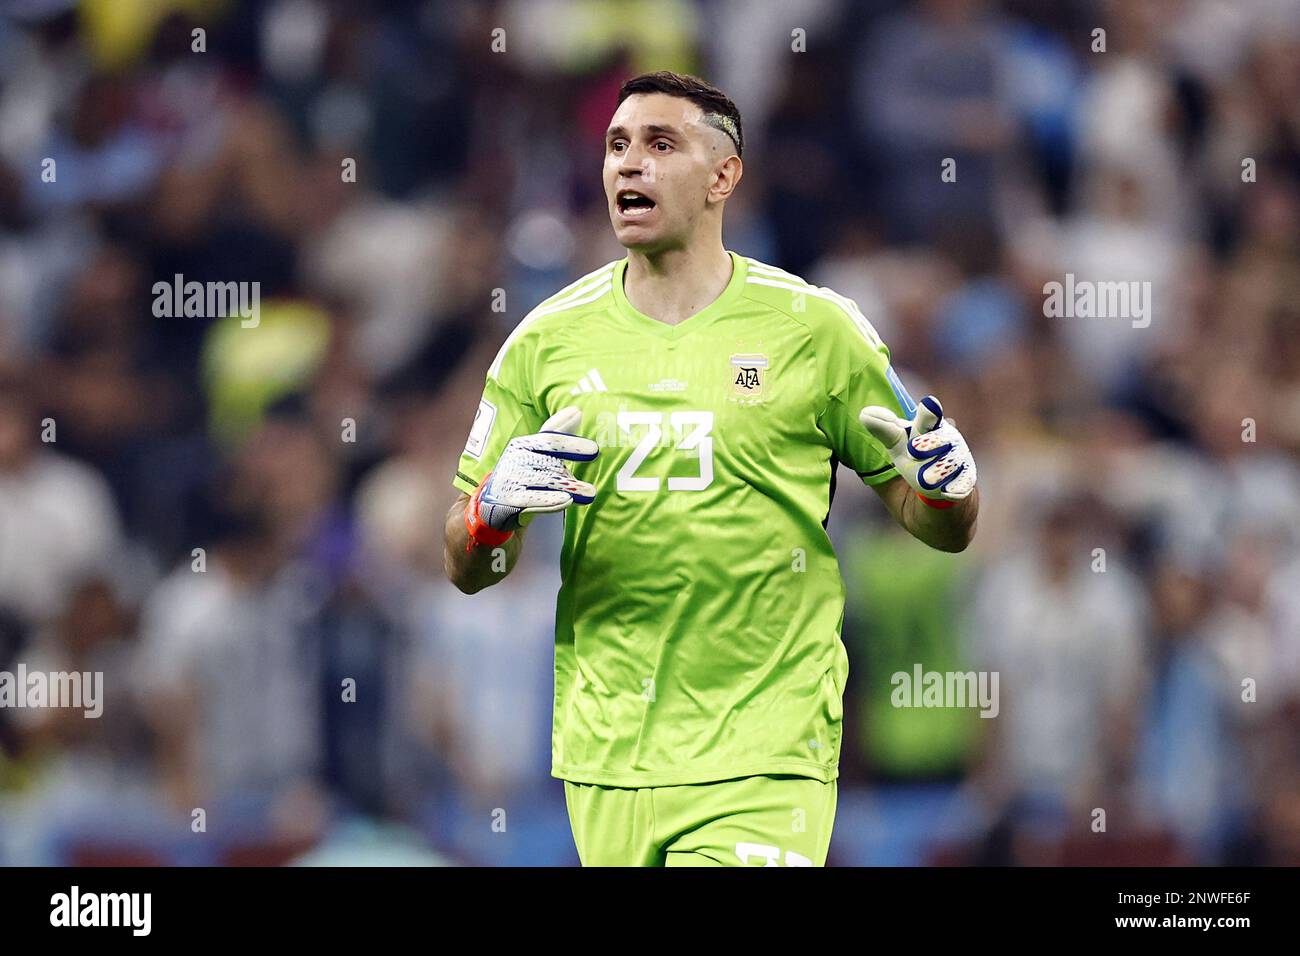 Lusail, Qatar. Dec 13, 2022, Emiliano Martinez of Argentina during the FIFA  World Cup Qatar 2022 match, Semi-final between Argentina and Croatia played  at Lusail Stadium on Dec 13, 2022 in Lusail